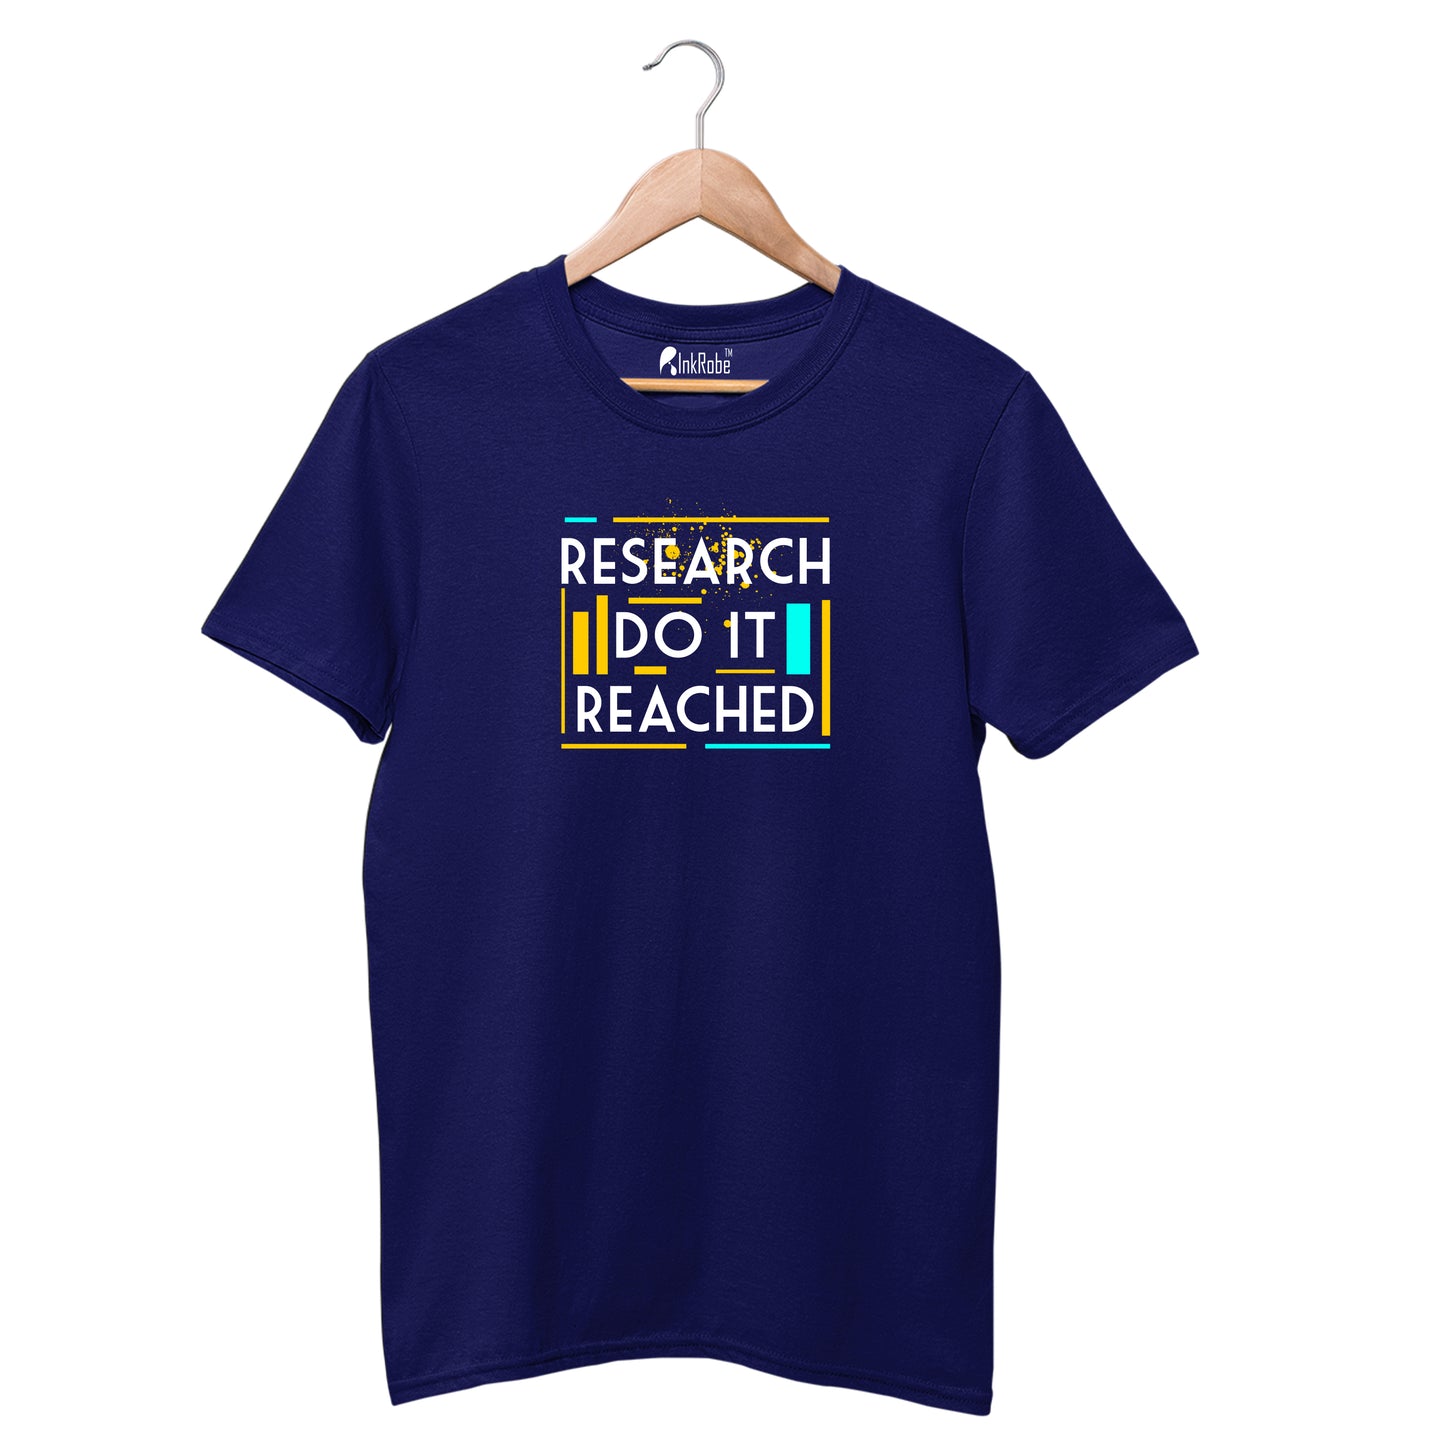 Research T-shirts